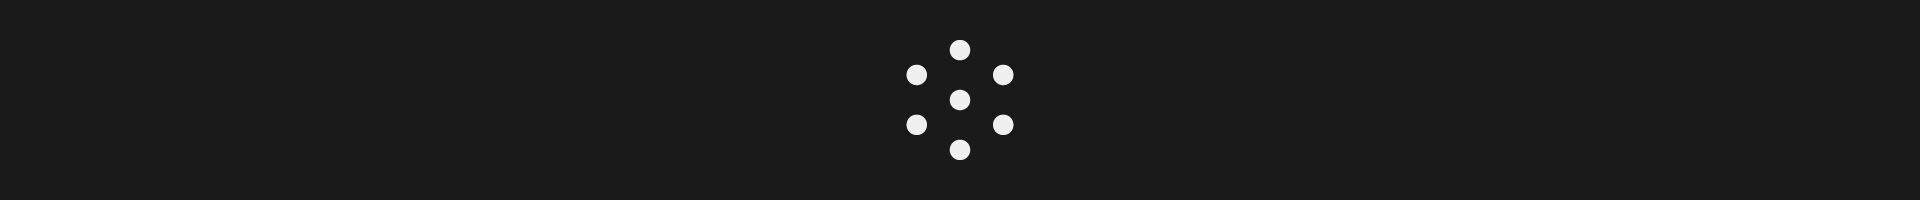 White dots form the shape of a flower on a black background and invites users to access Betty.